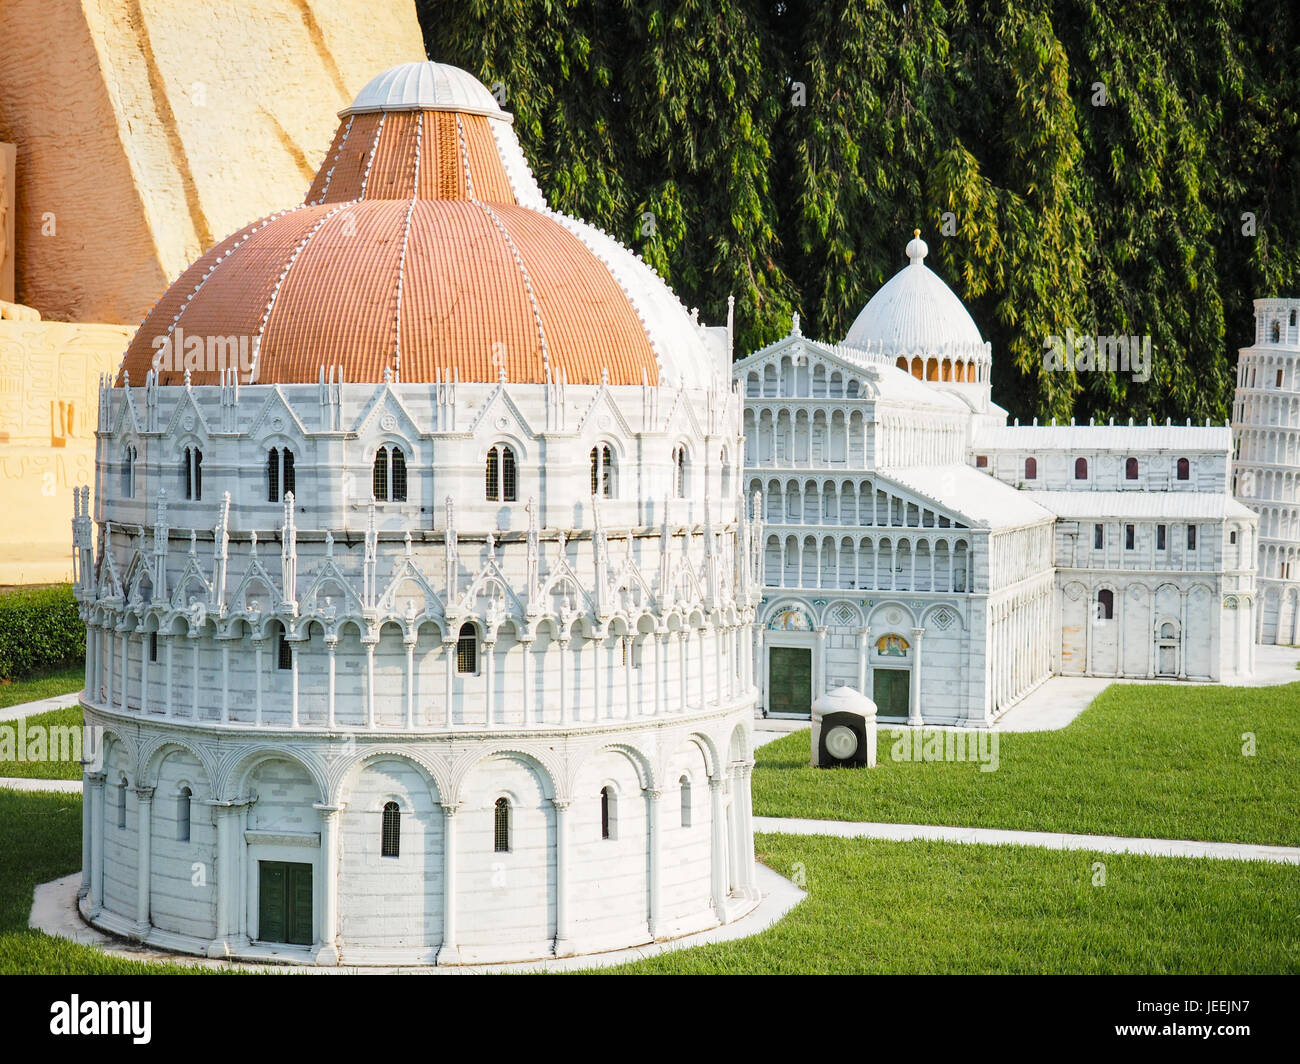 Baptistery (battistero), Pisa Cathedral (duomo) and the Leaning Tower (Torre Pendente) on the Square of Miracles (Campo dei Miracoli) in Pisa, Tuscany Stock Photo